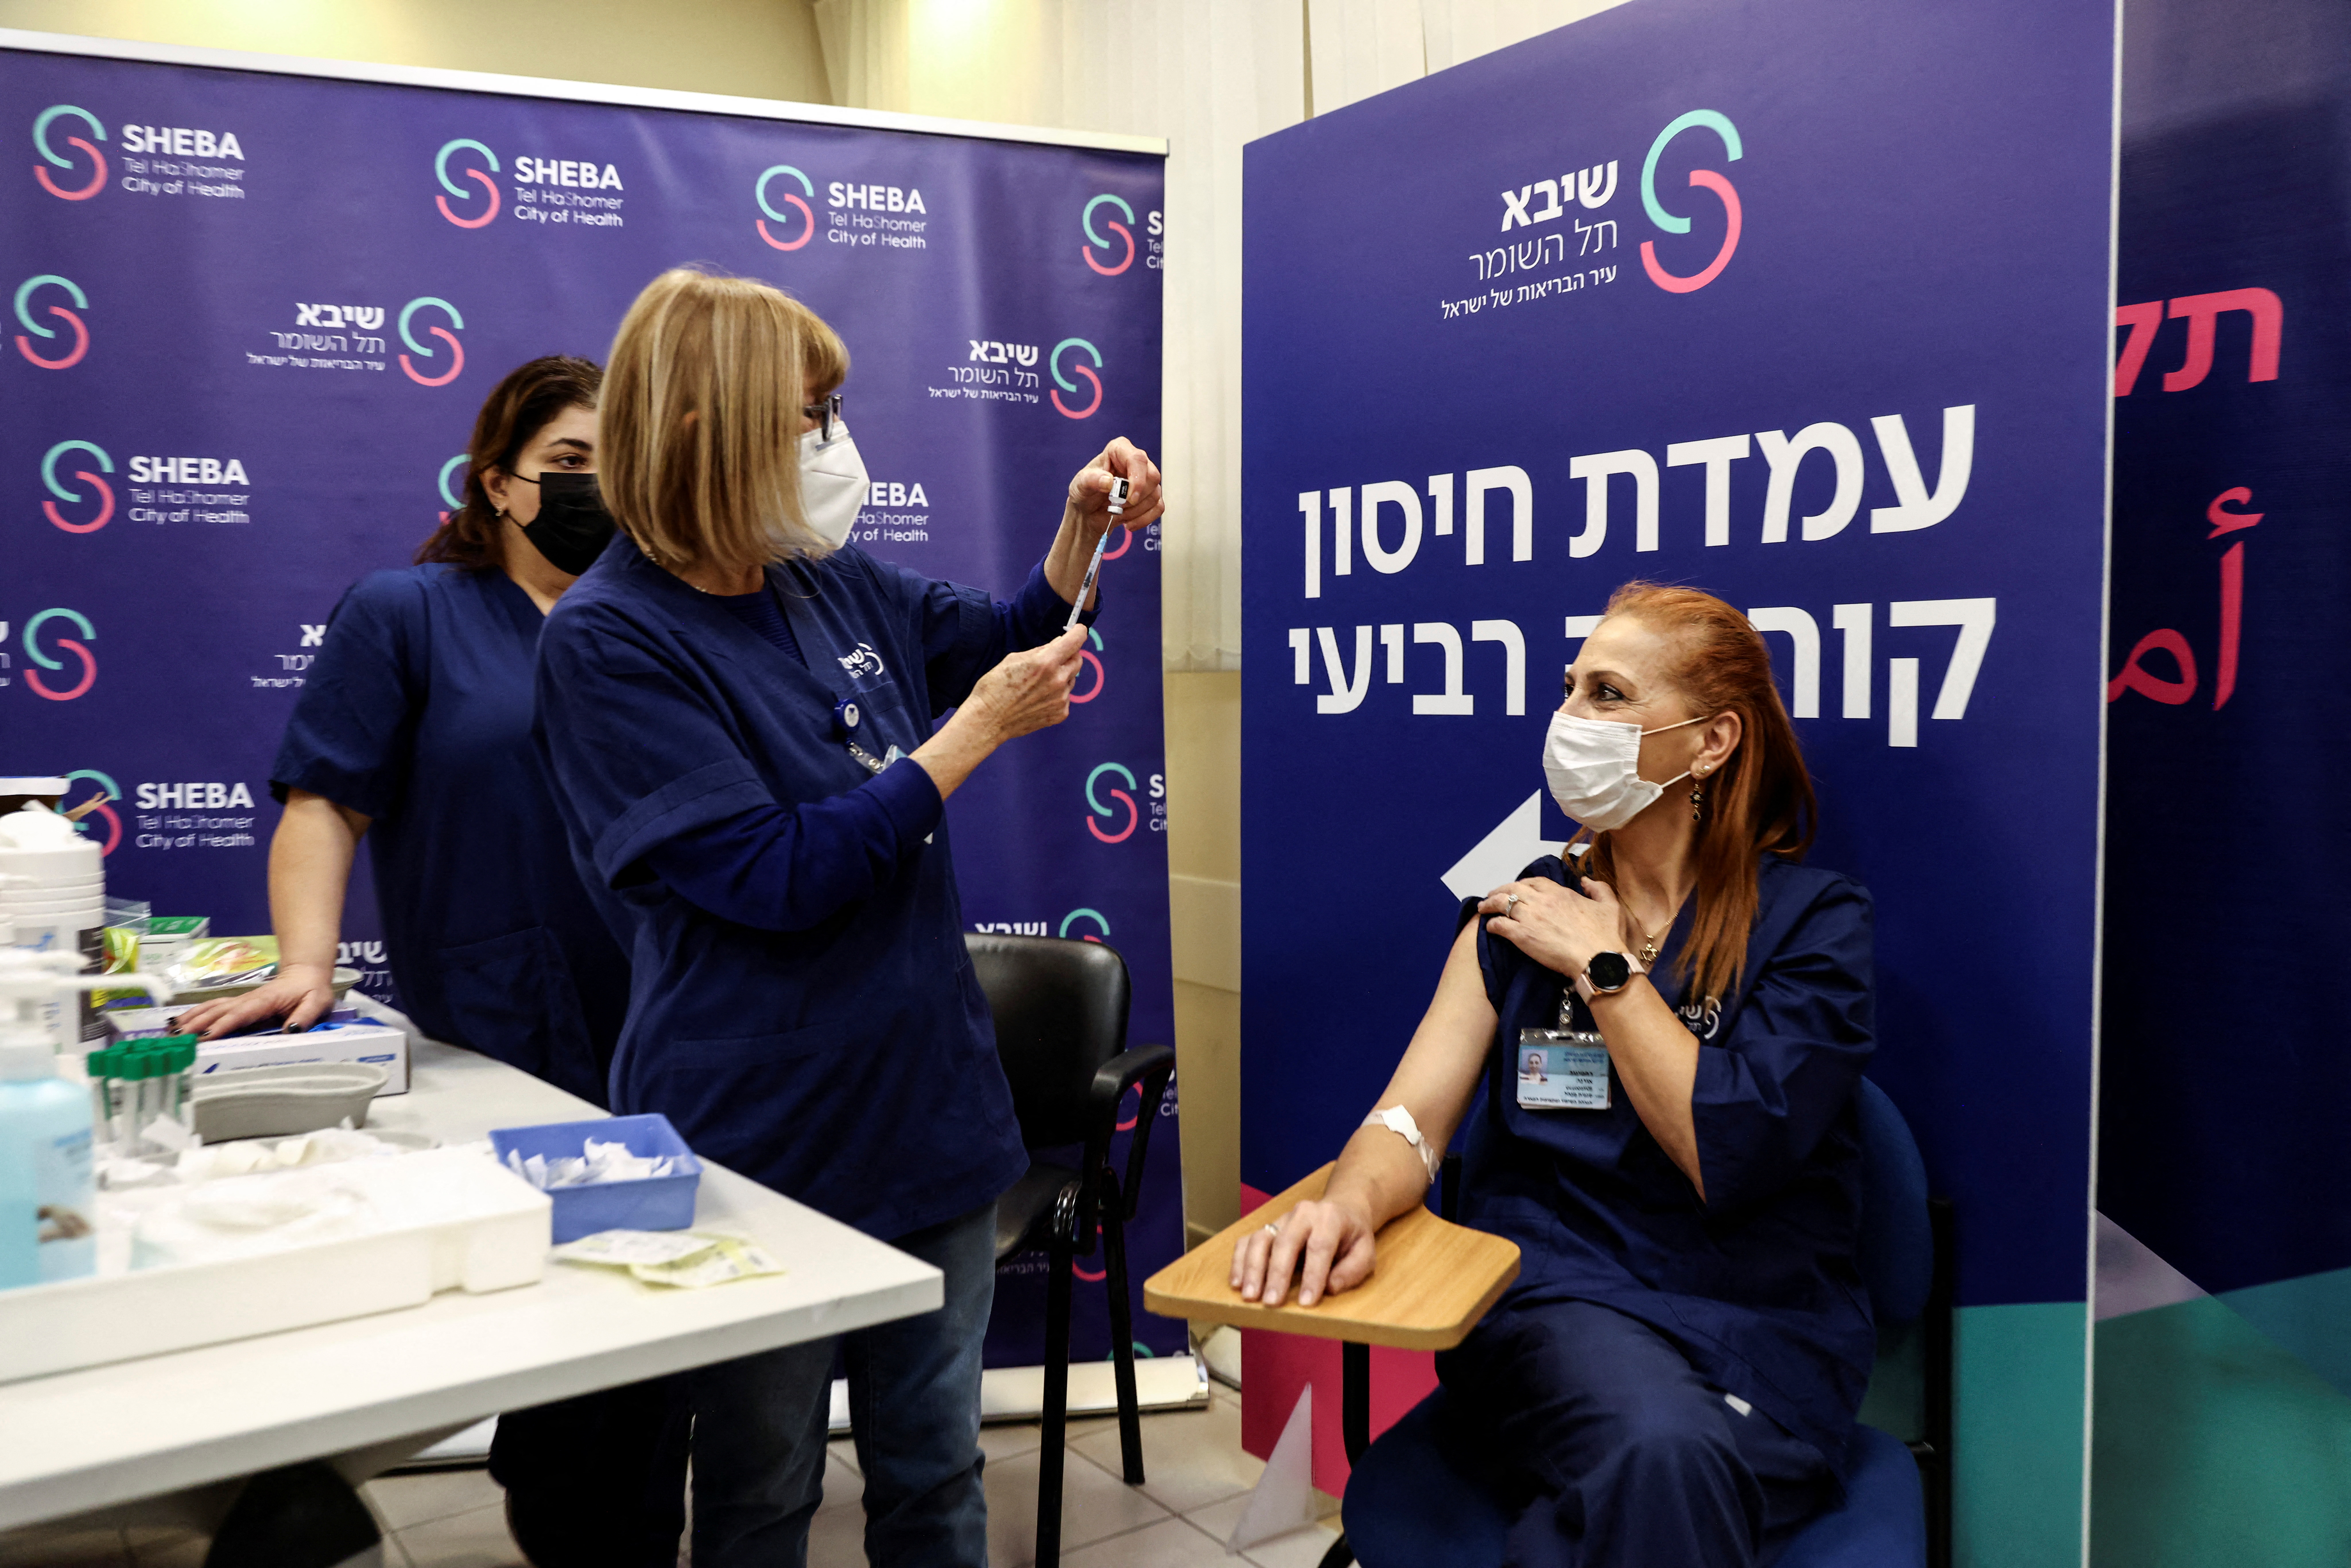 A medical worker receives a fourth dose of coronavirus disease (COVID-19) vaccine as part of a trial in Israel, as Health Ministry is considering offering the second booster to the elderly and immunocompromised at Sheba Medical Center in Ramat Gan